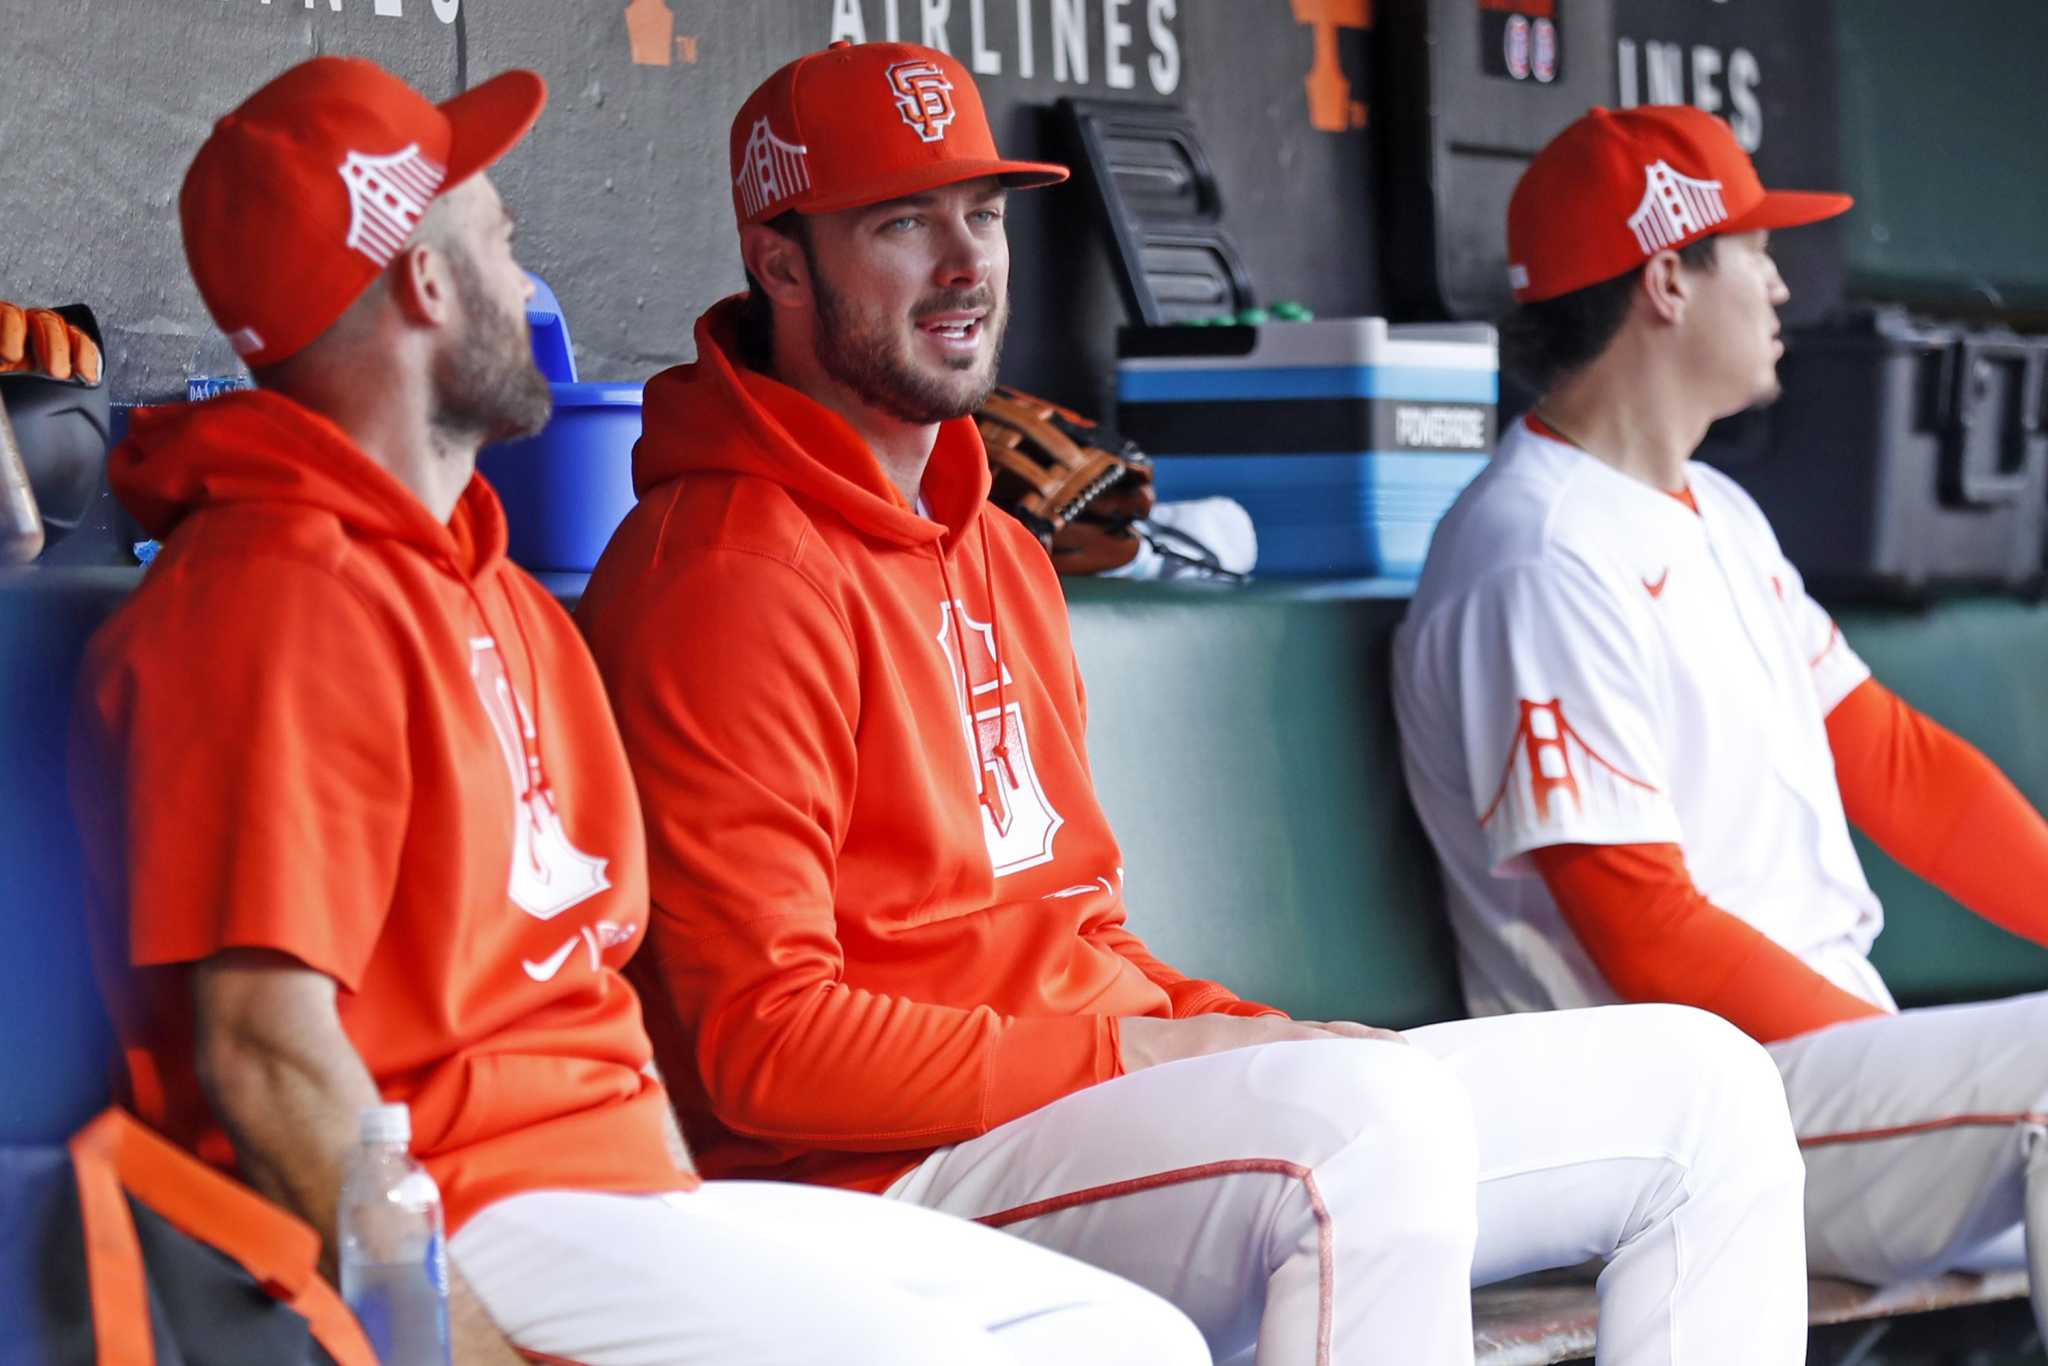 Kris Bryant shares heartfelt moment in dugout after trade to Giants -  Sports Illustrated